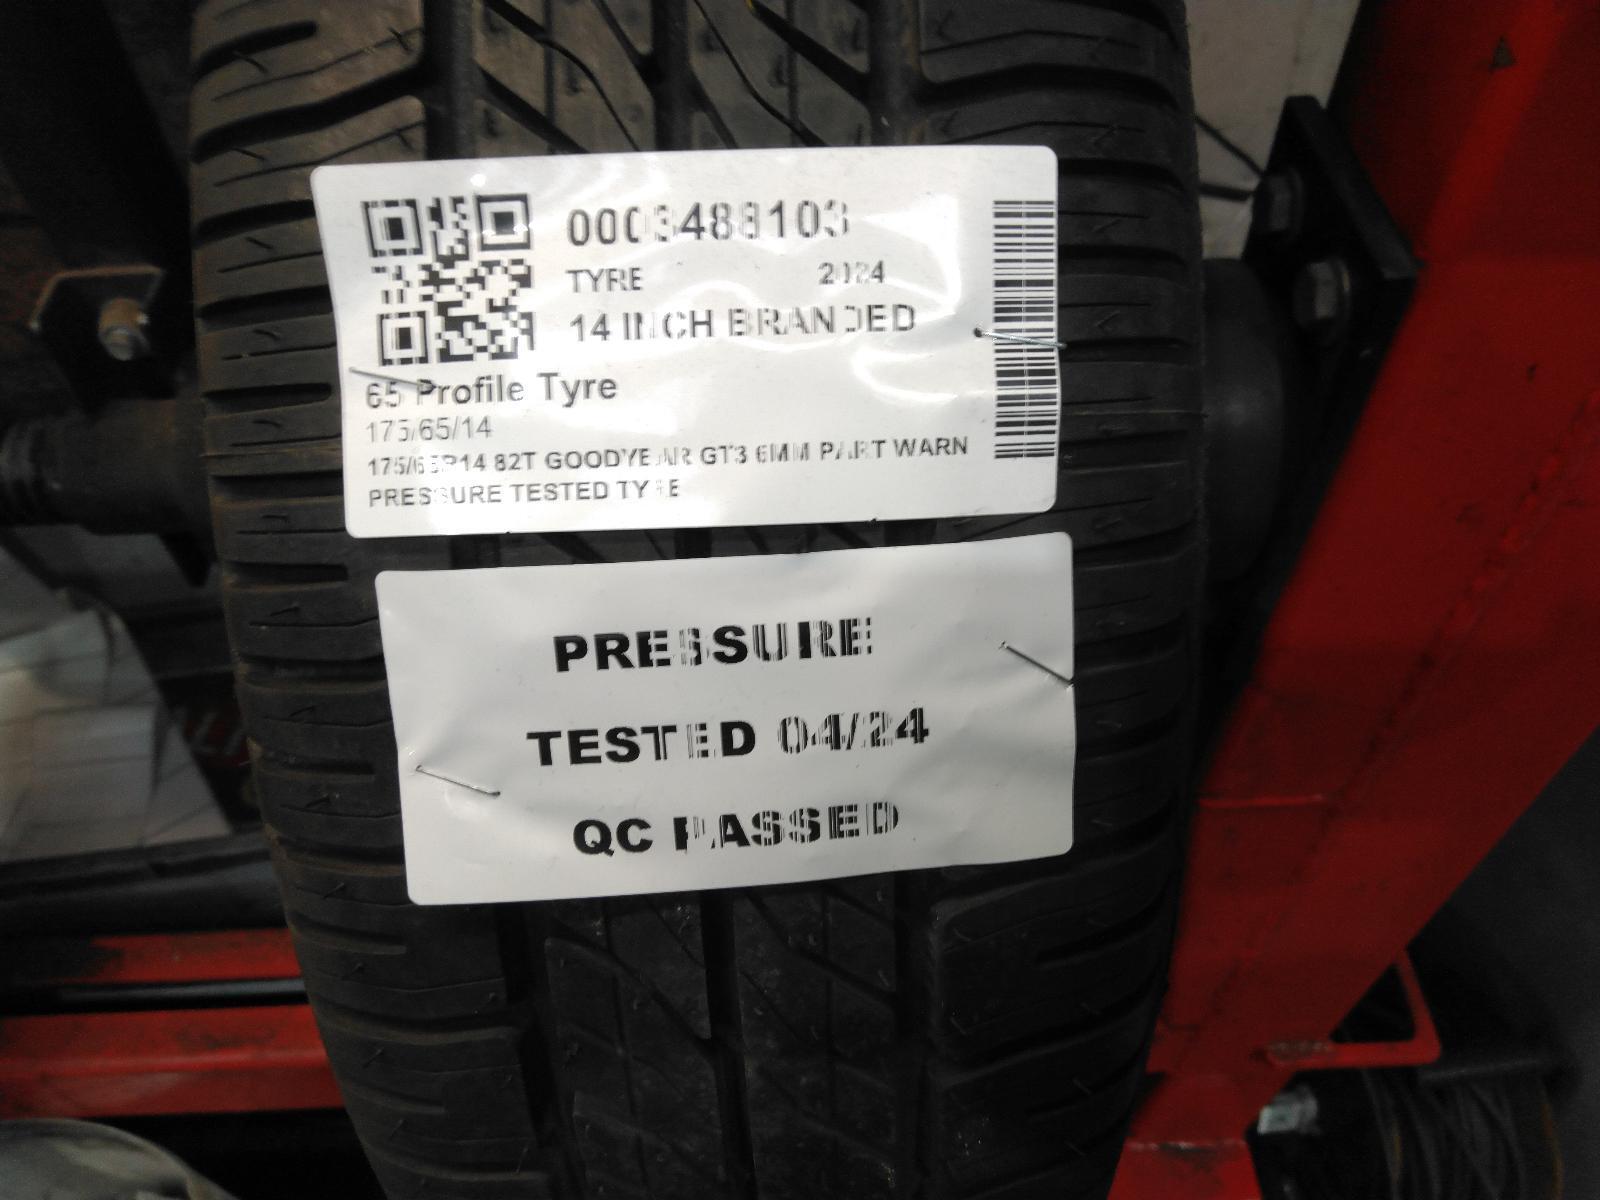 175/65R14 82T GOODYEAR GT3 6MM PART WARN PRESSURE TESTED TYRE